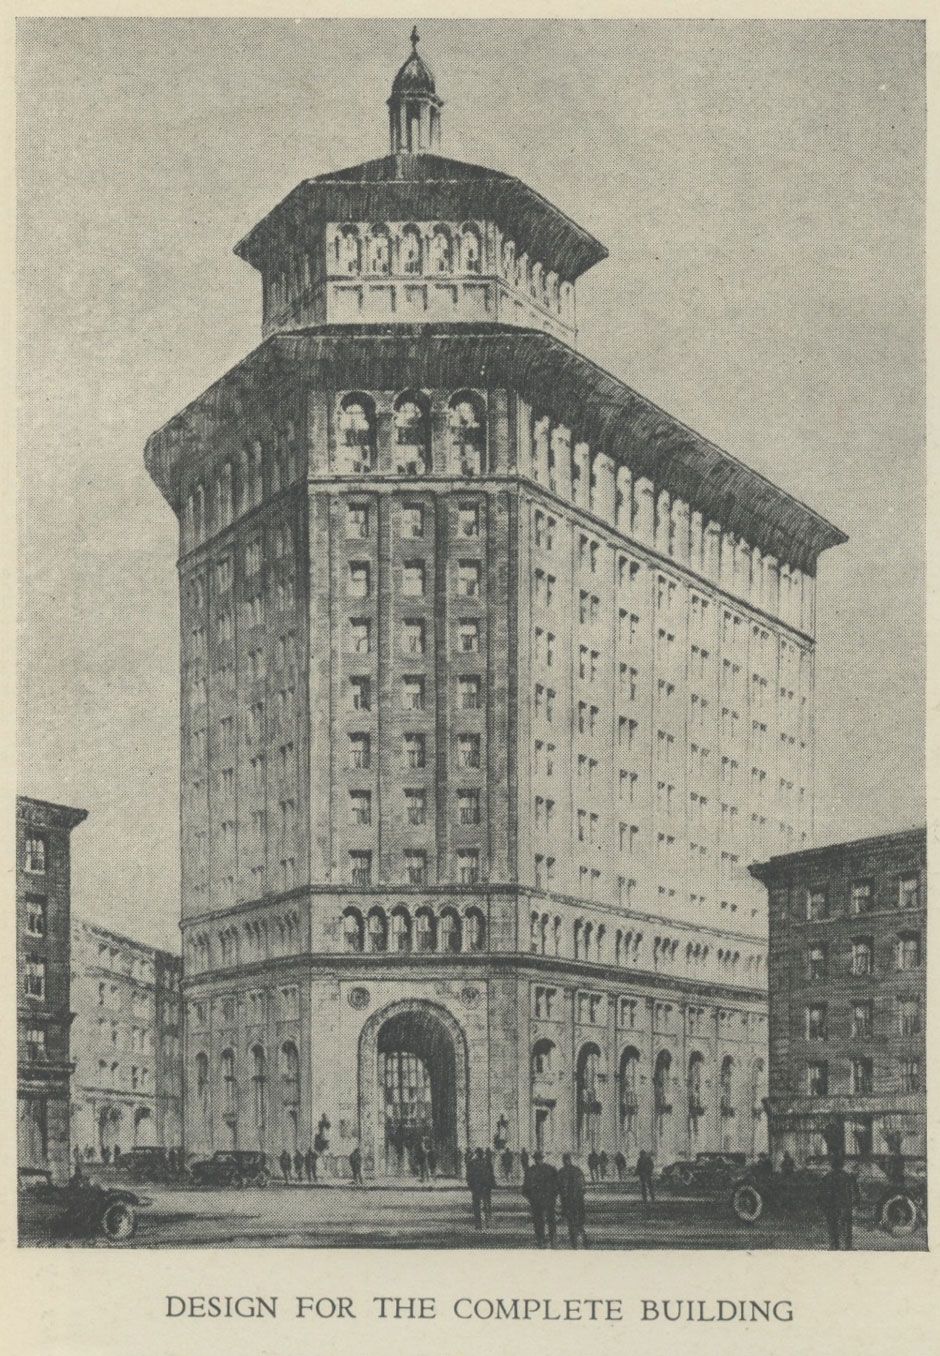 Lost Drawings of Rochester Savings Bank; 14-Stories Tall?